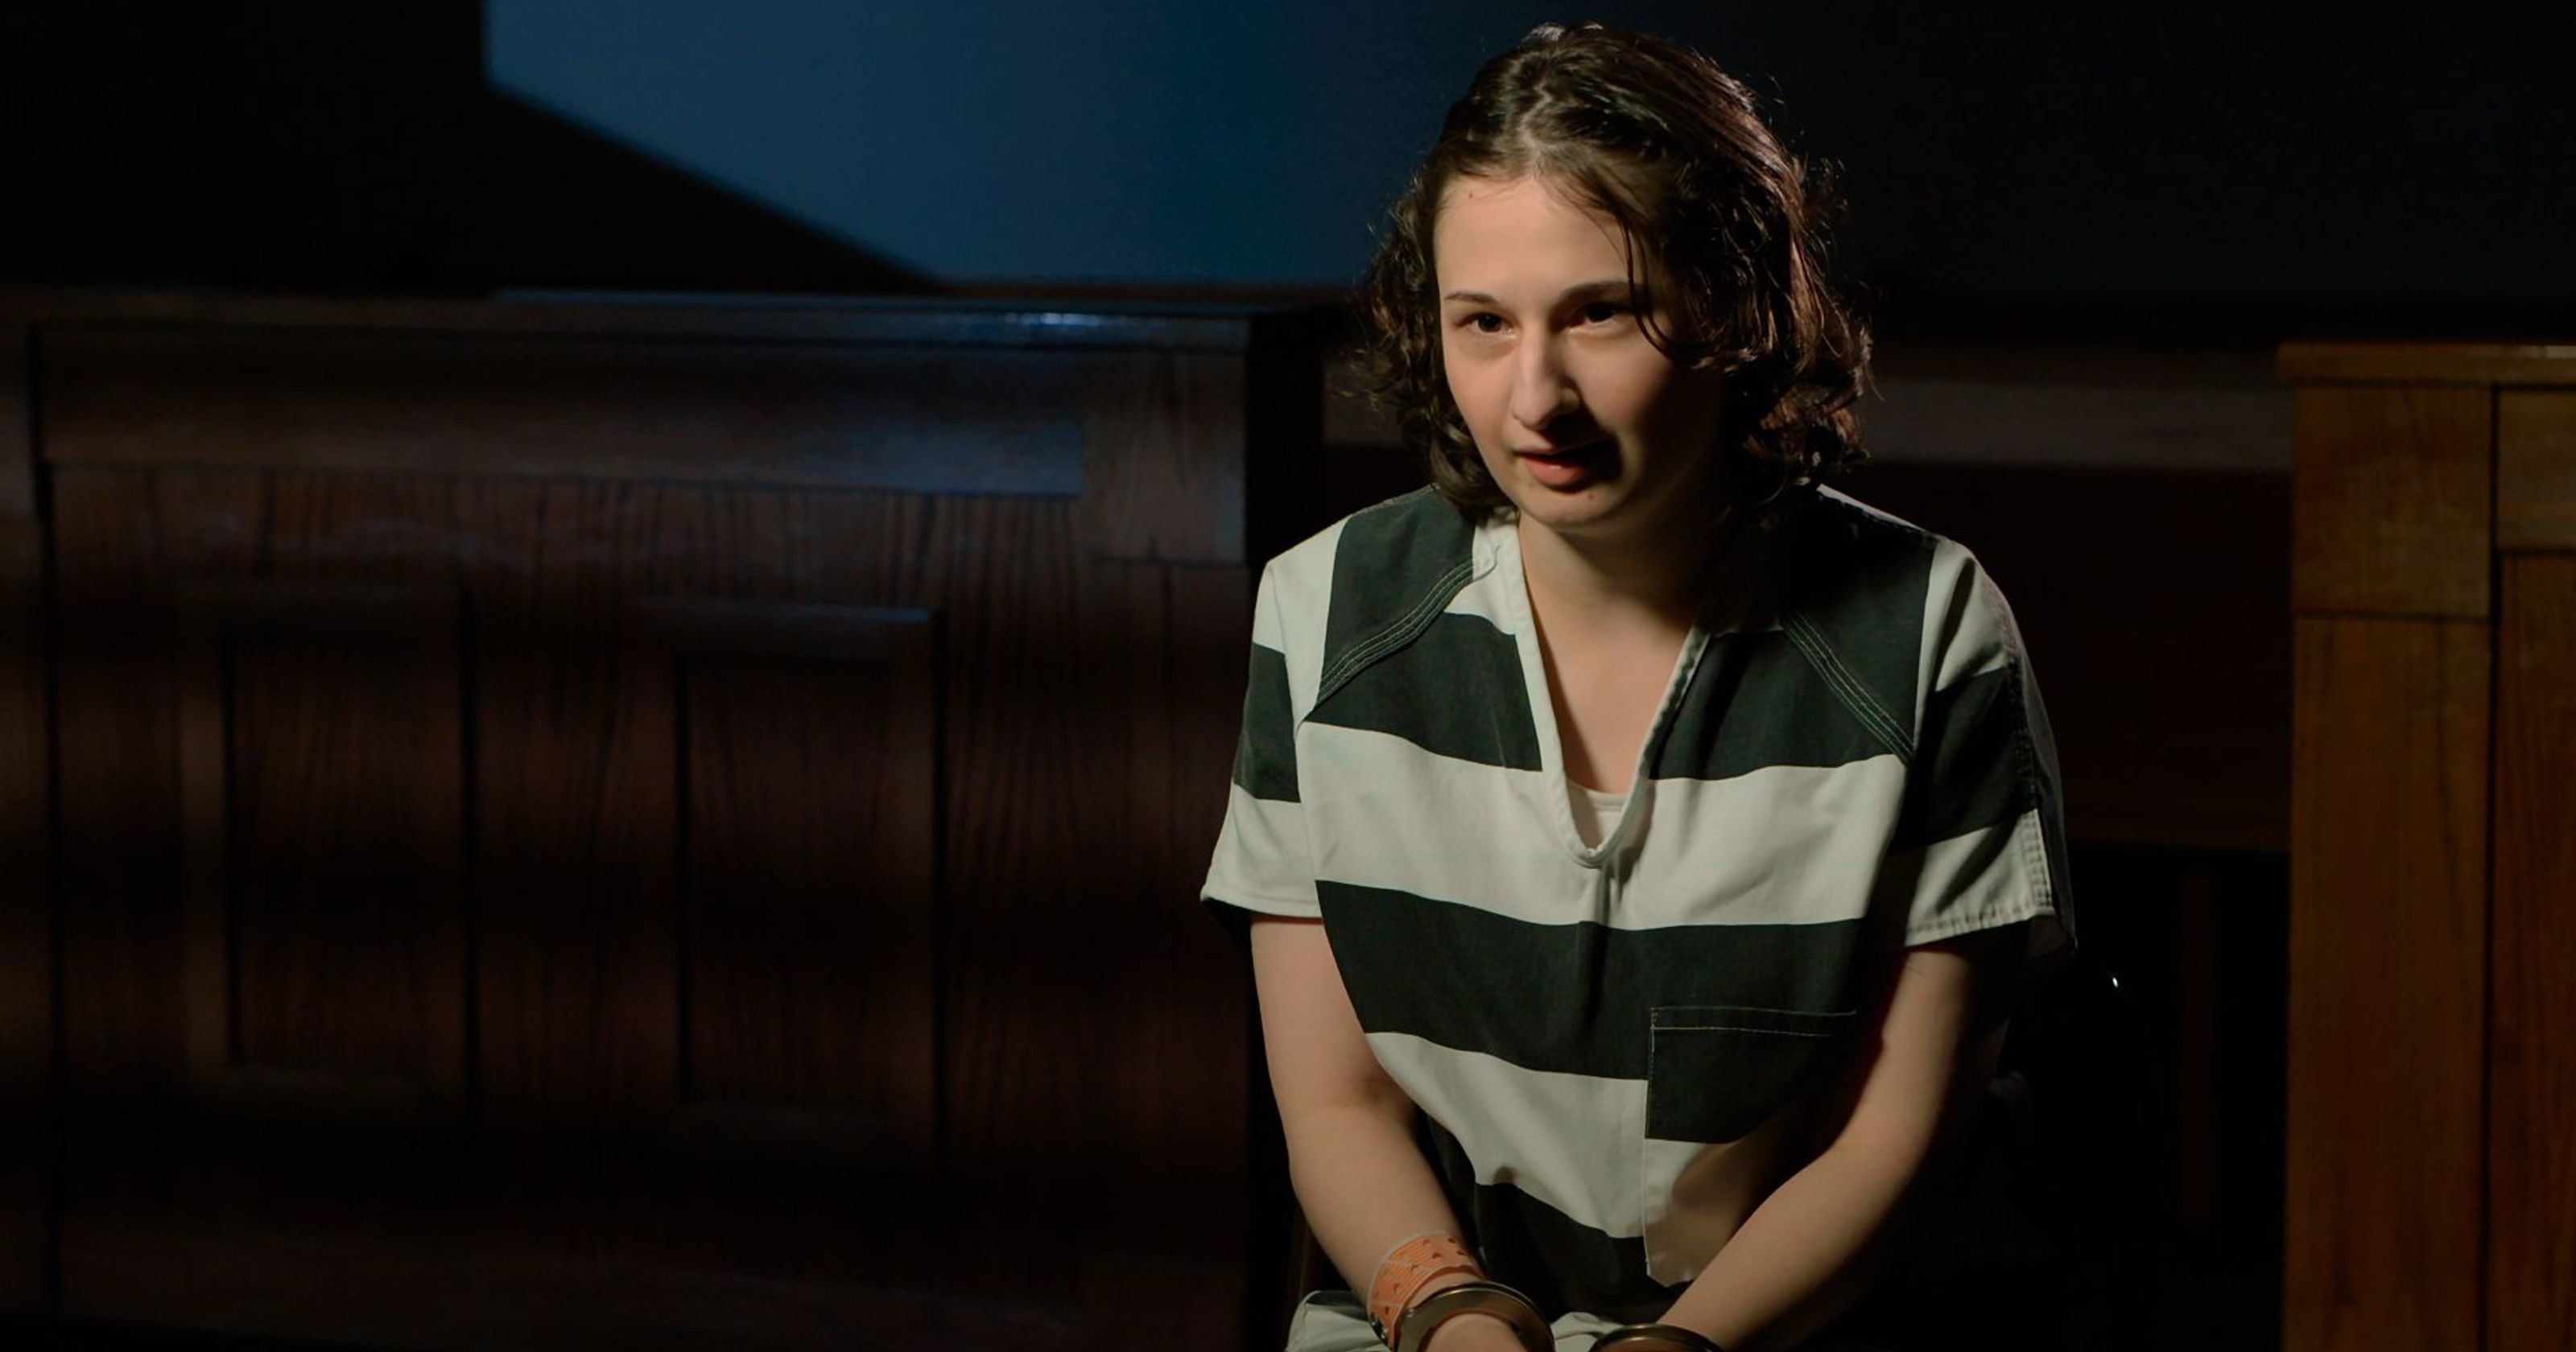 Gypsy Rose Blanchard Asks Supporters to Write Letters to Reduce